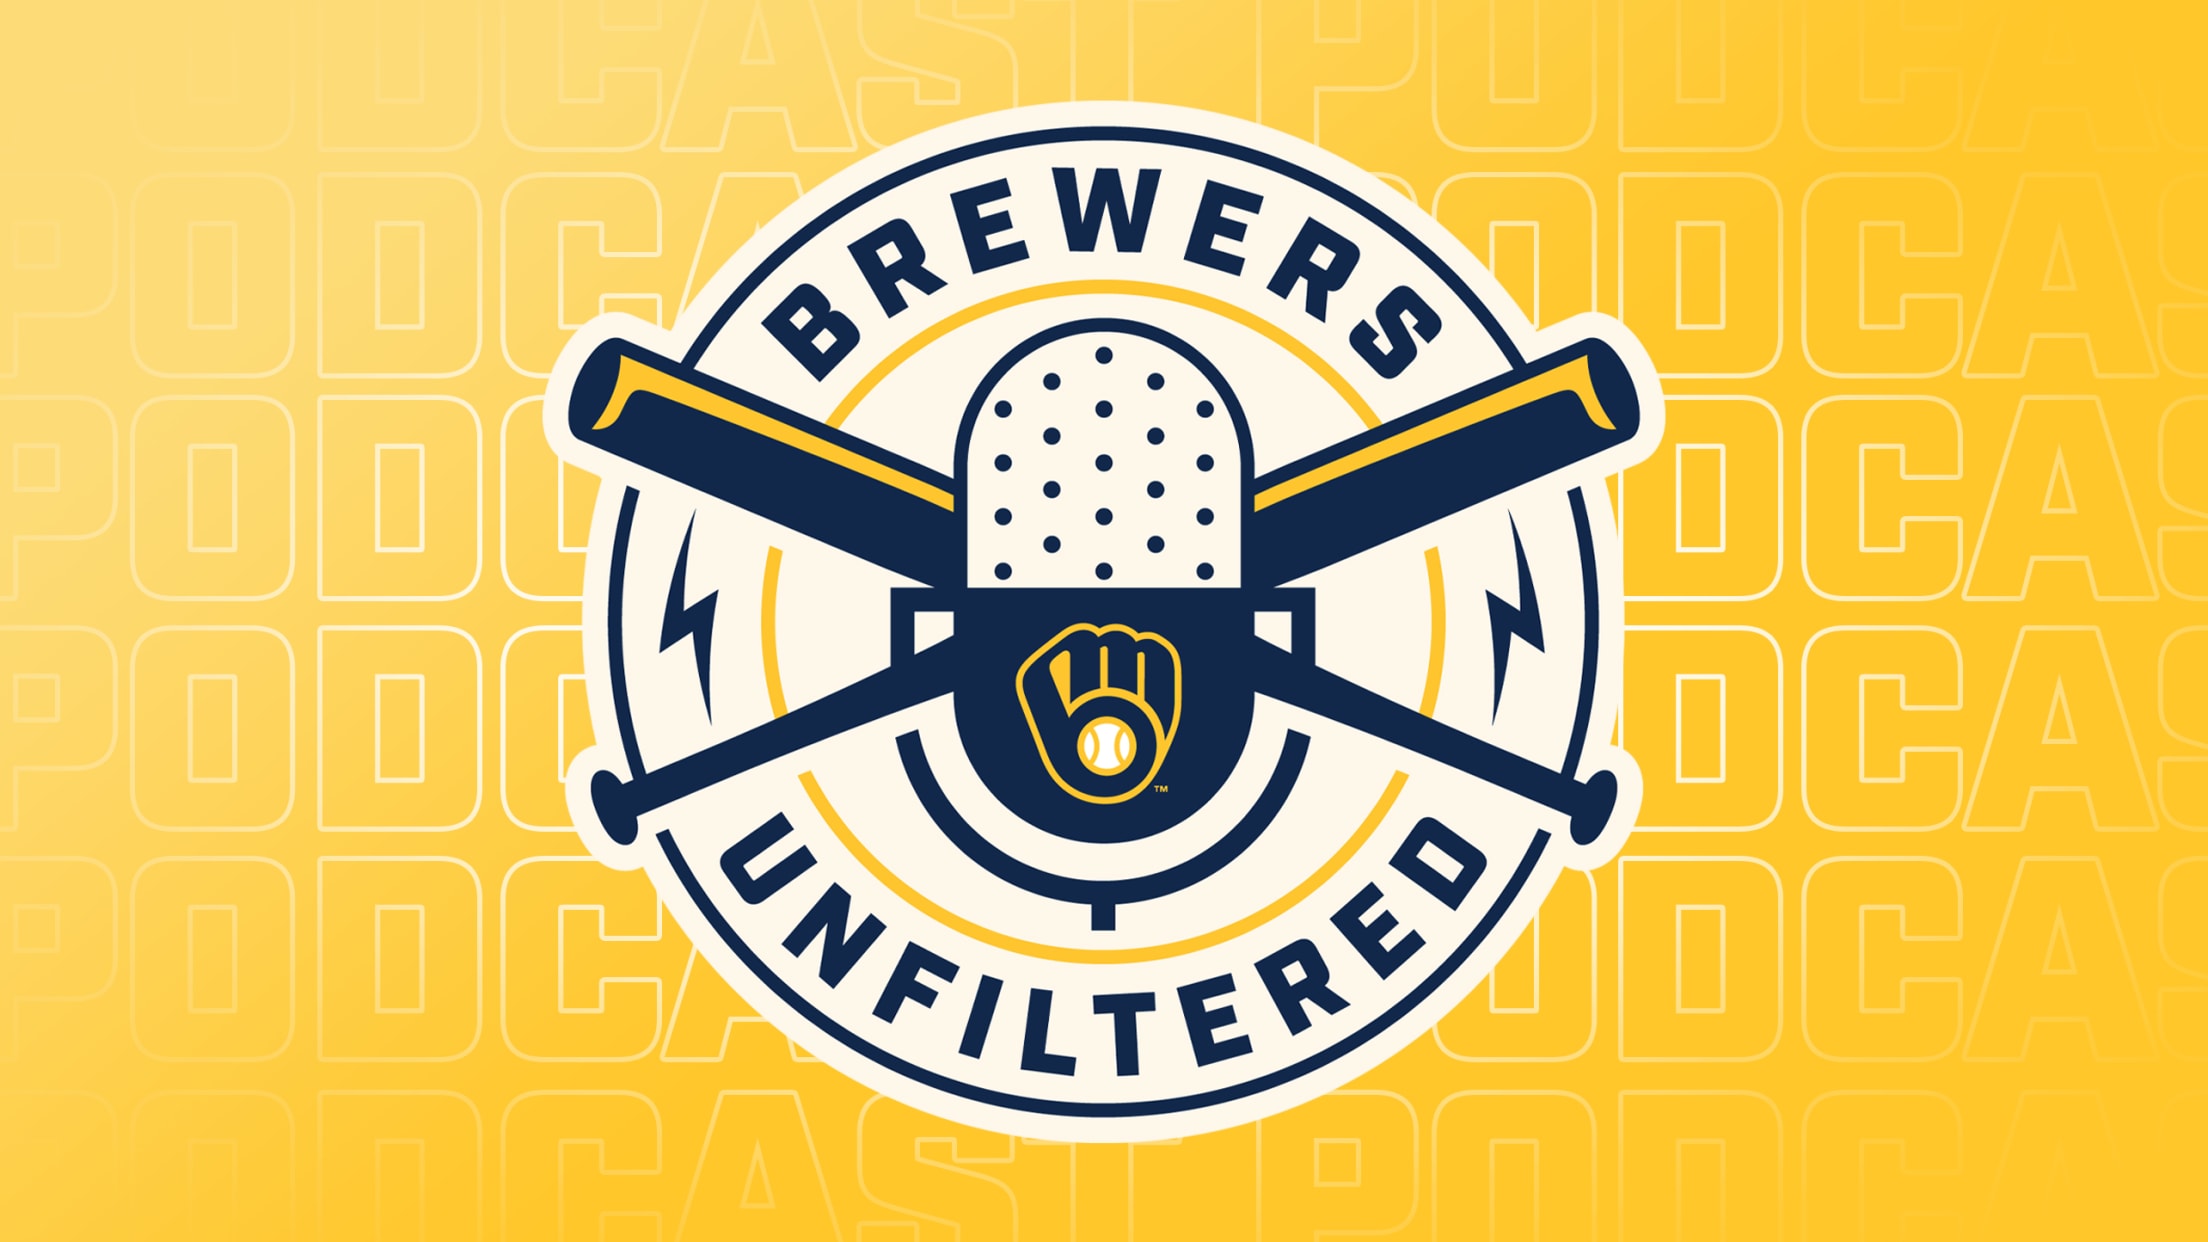 Brewers say back to the future logo, look is all about the fans